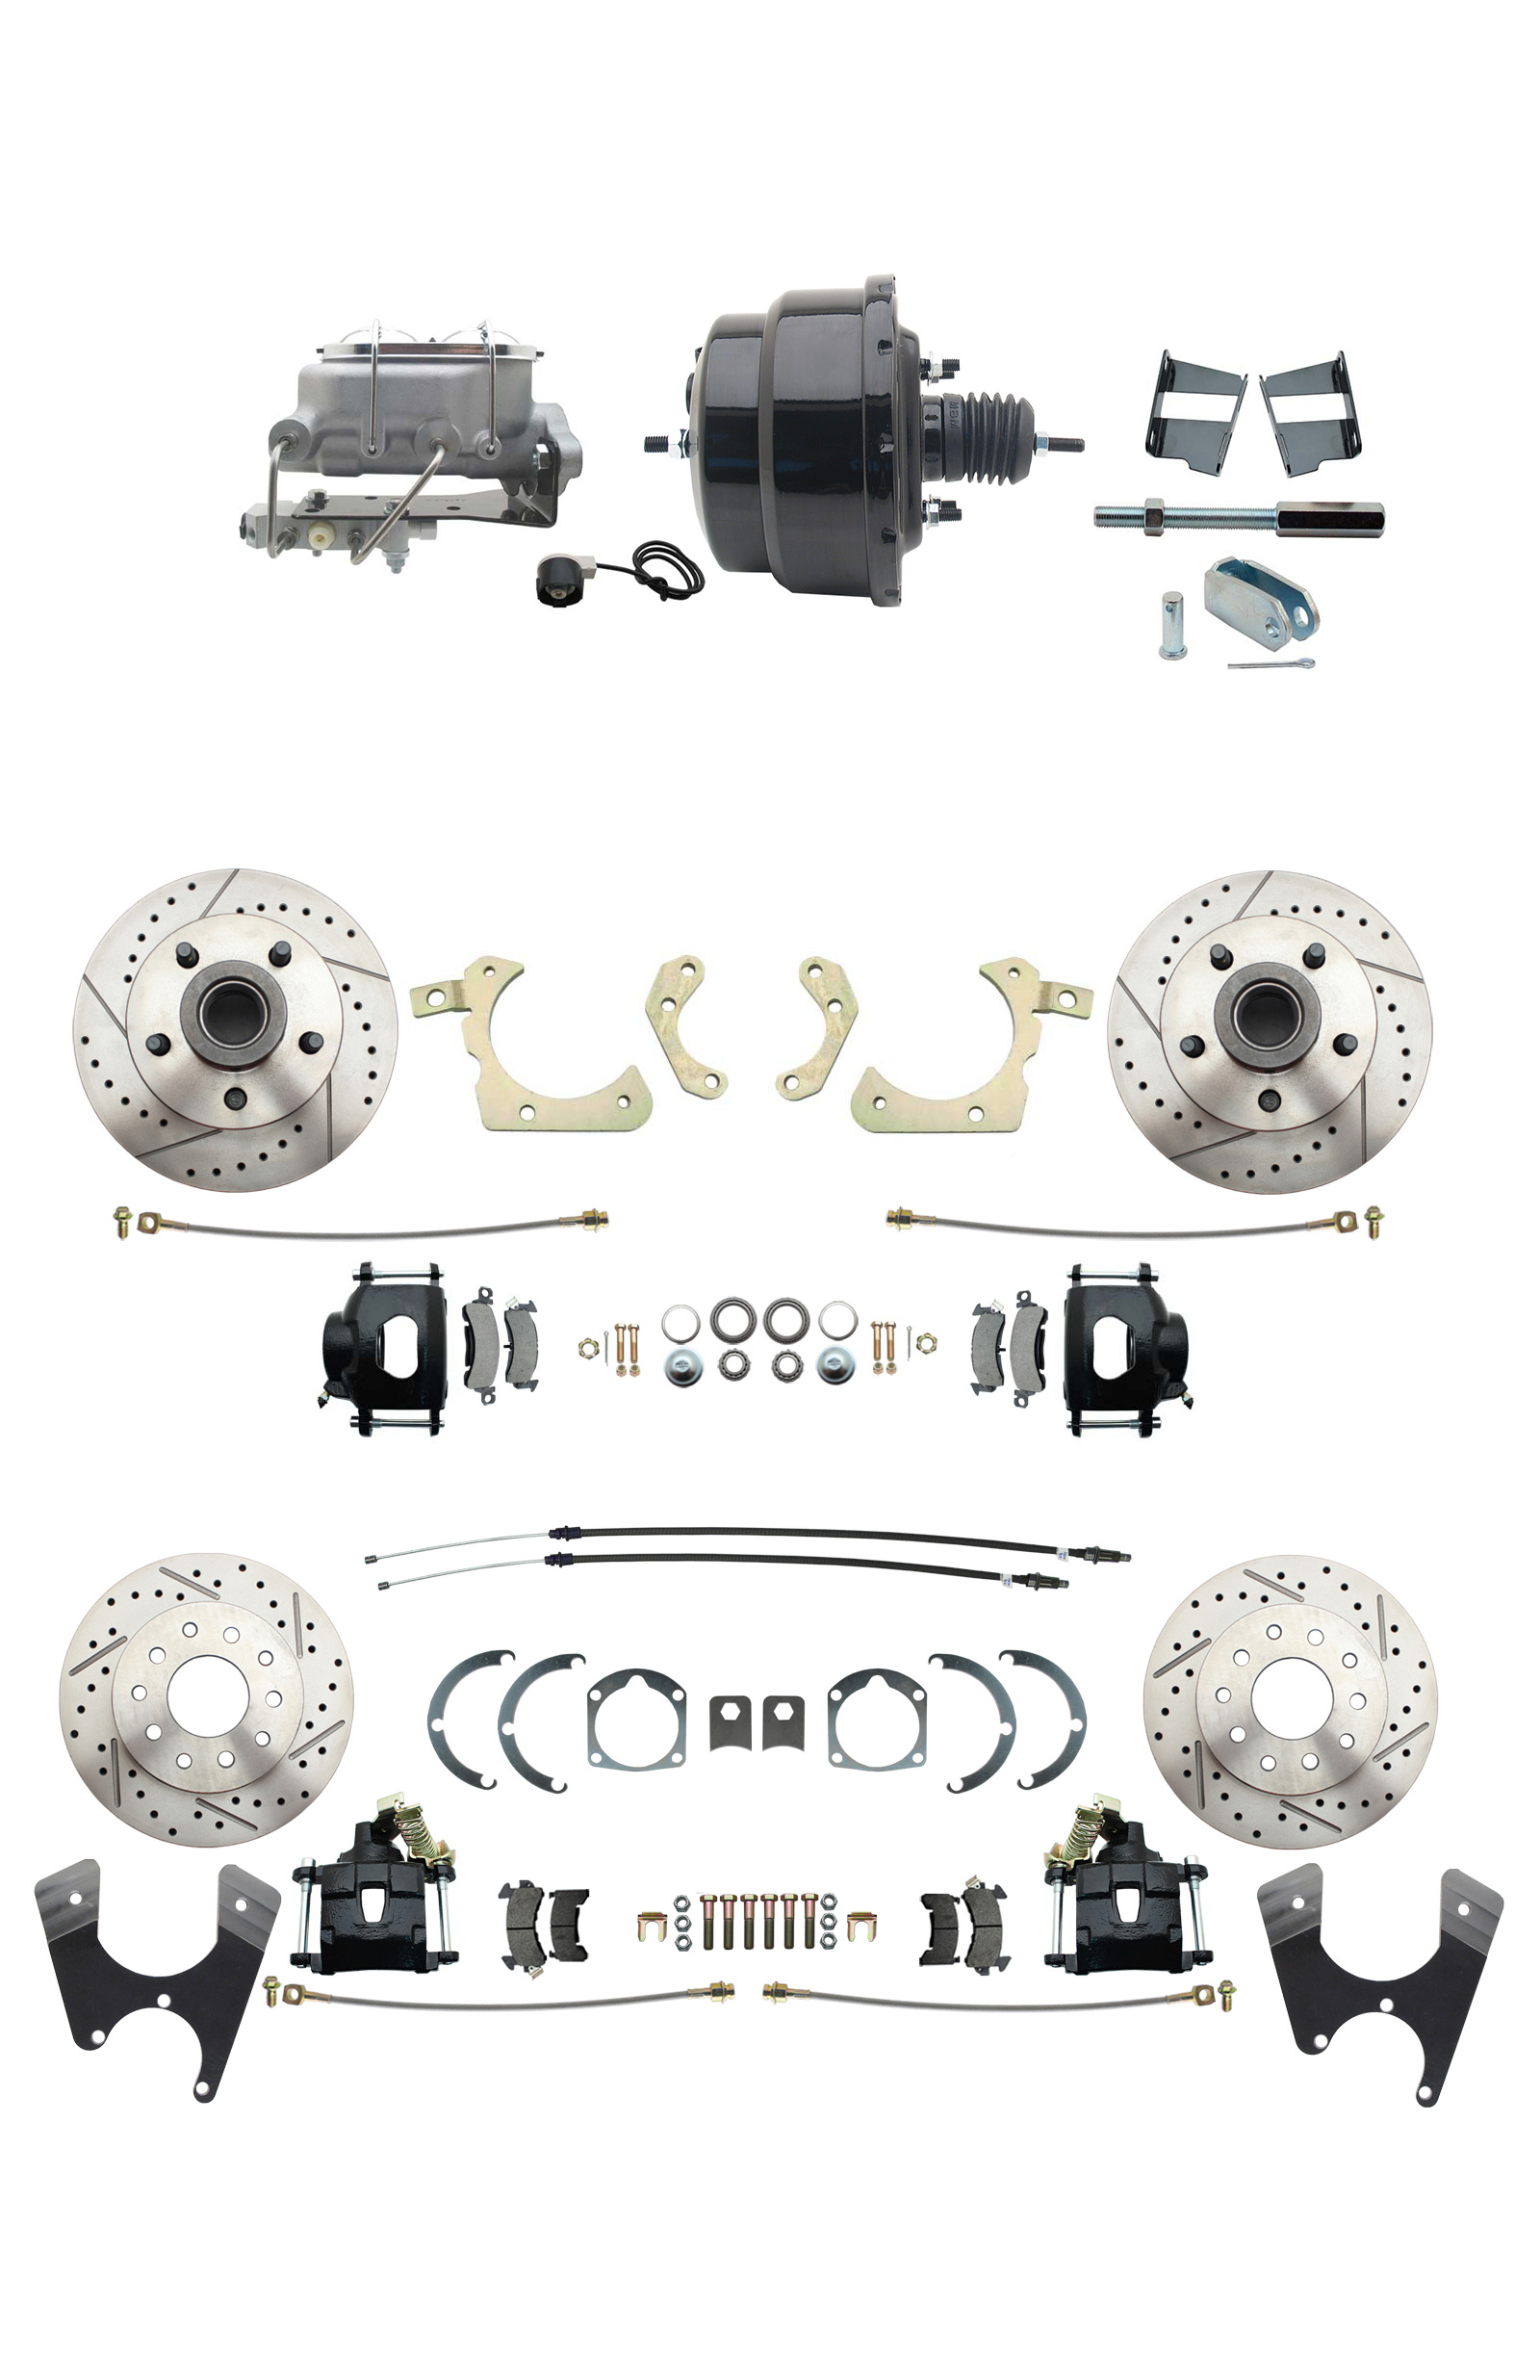 1959-1964 GM Full Size Front & Rear Power Disc Brake Kit Black Powder Coated Calipers Drilled/Slotted Rotors (Impala, Bel Air, Biscayne) & 8 Dual Powder Coated Black Booster Conversion Kit W/ Aluminum Master Cylinder Bo